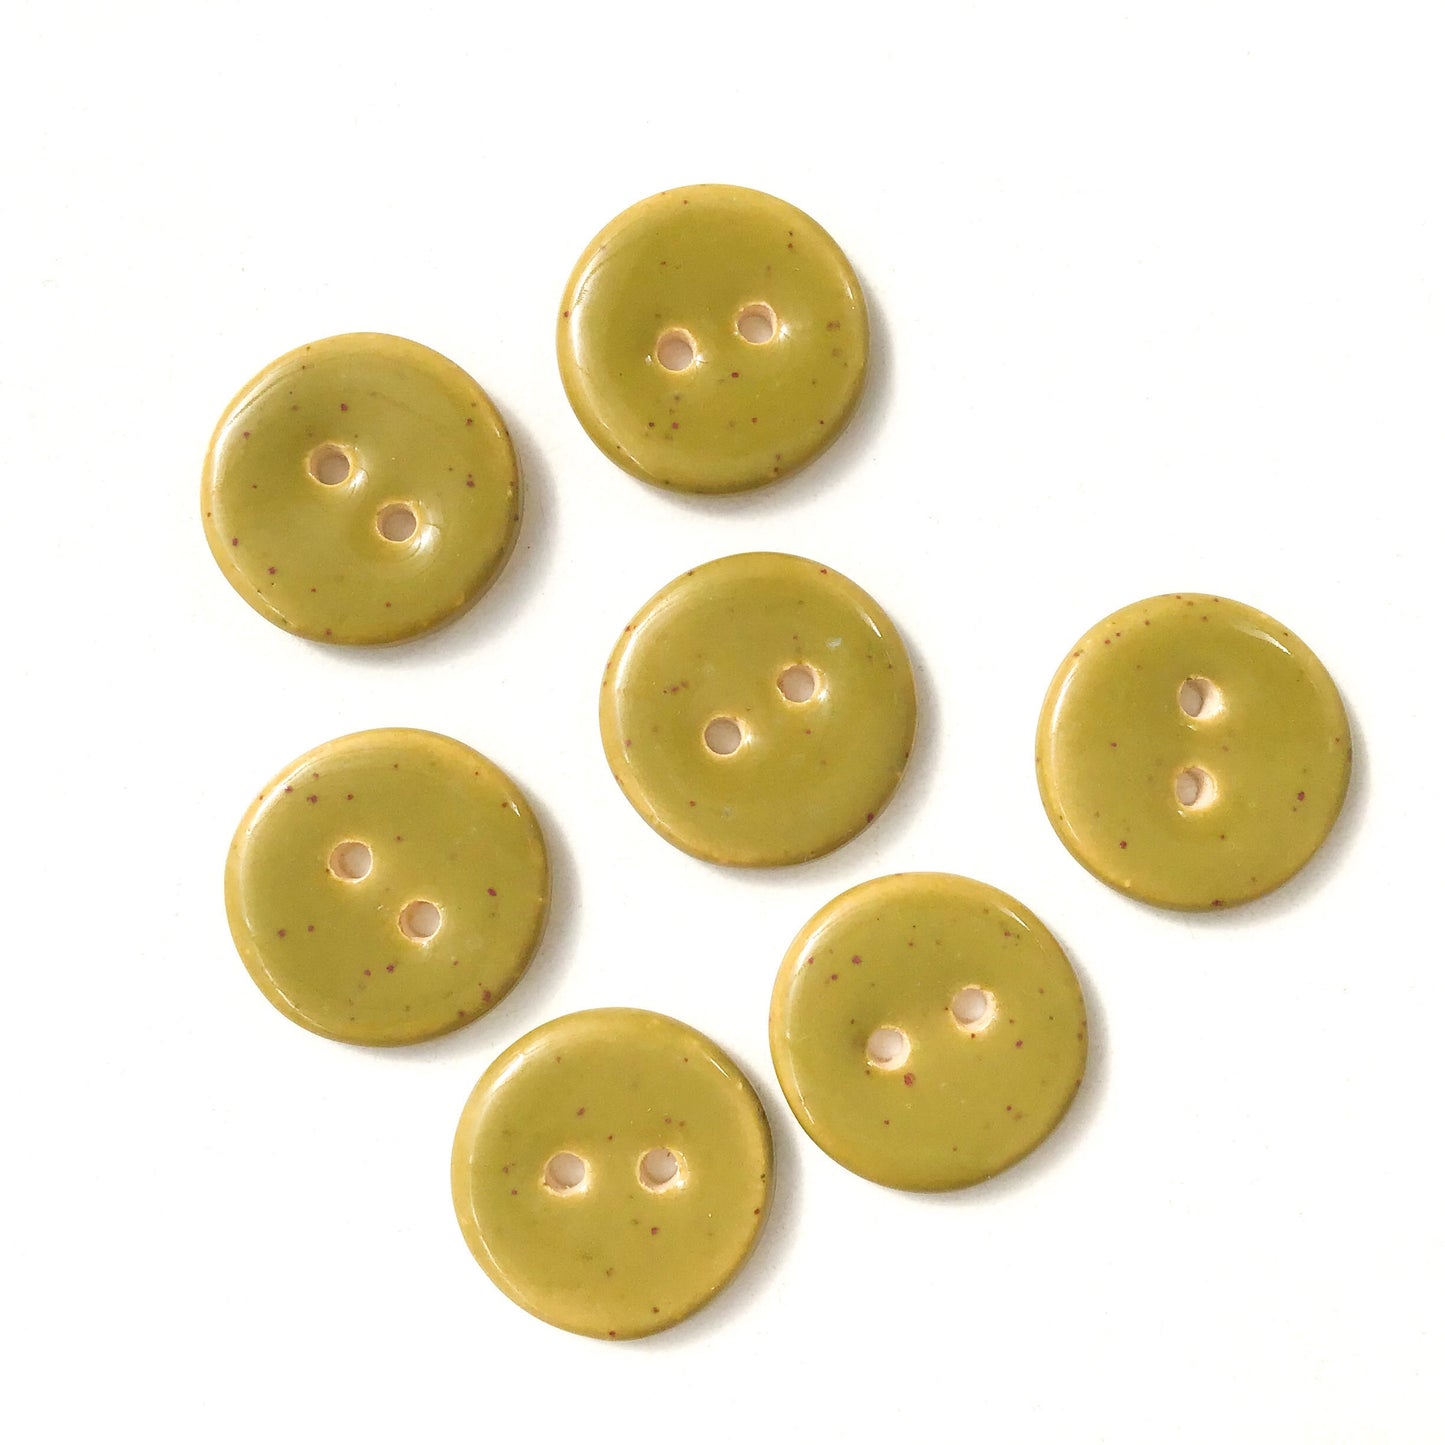 Speckled Olive Green Ceramic Buttons - Mossy Green Clay Buttons - 3/4" (ws-222)